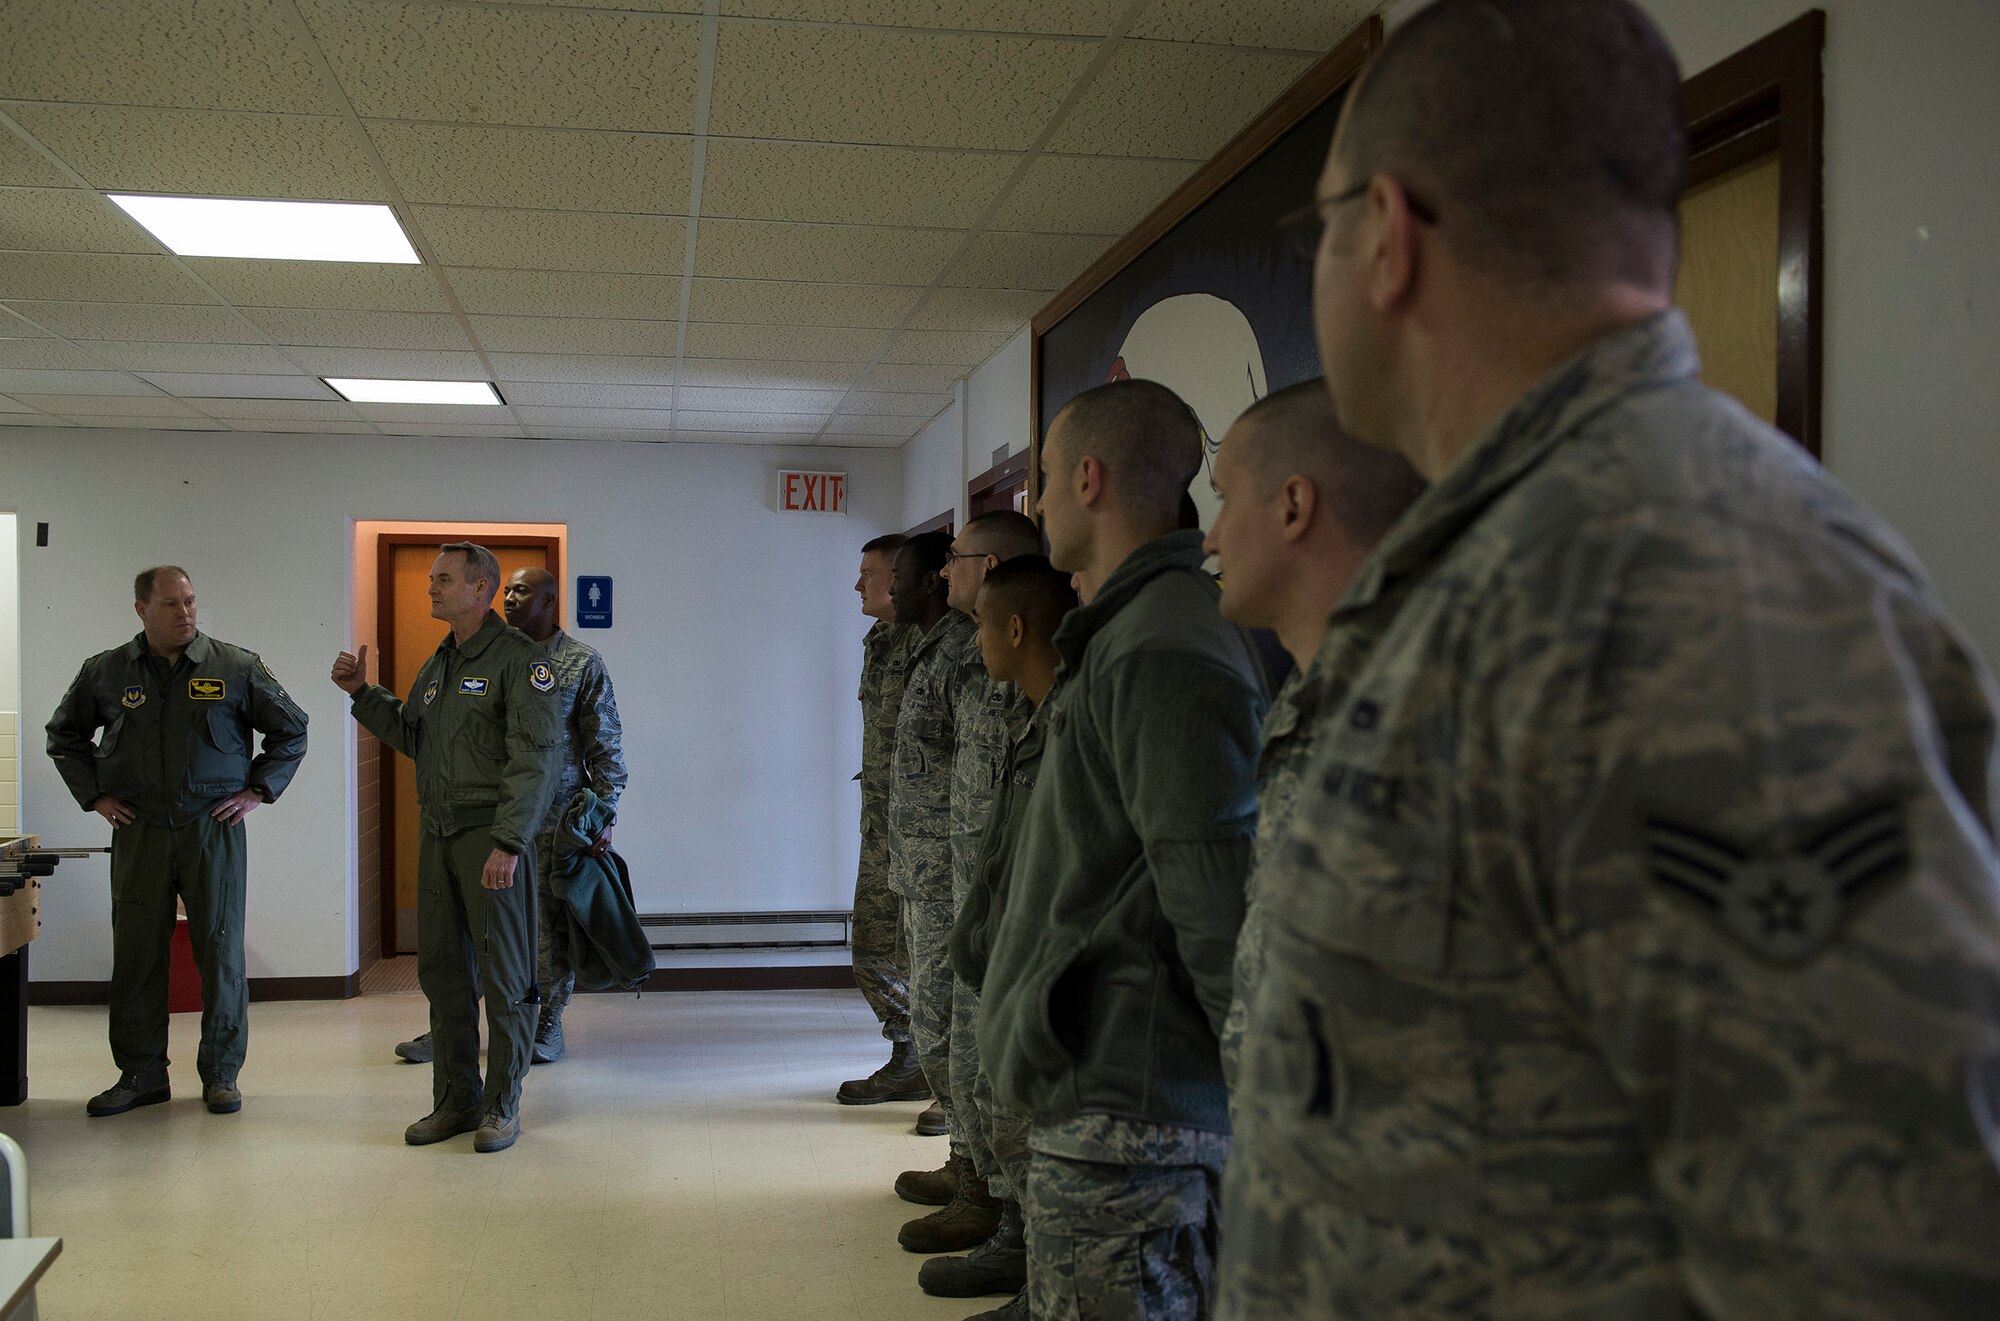 U.S. Air Force Lt. Gen. Darryl Roberson, 3rd Air Force commander, speaks with maintenance personnel at the Icelandic Air Surveillance and Policing maintenance center in Keflavik, Iceland, April 23, 2015. Roberson toured the facilities and spoke with Airmen regarding the IAS mission, an ongoing NATO commitment to maintain the security of Iceland’s airspace. (U.S. Air Force photo by Staff Sgt. Chad Warren/Released)